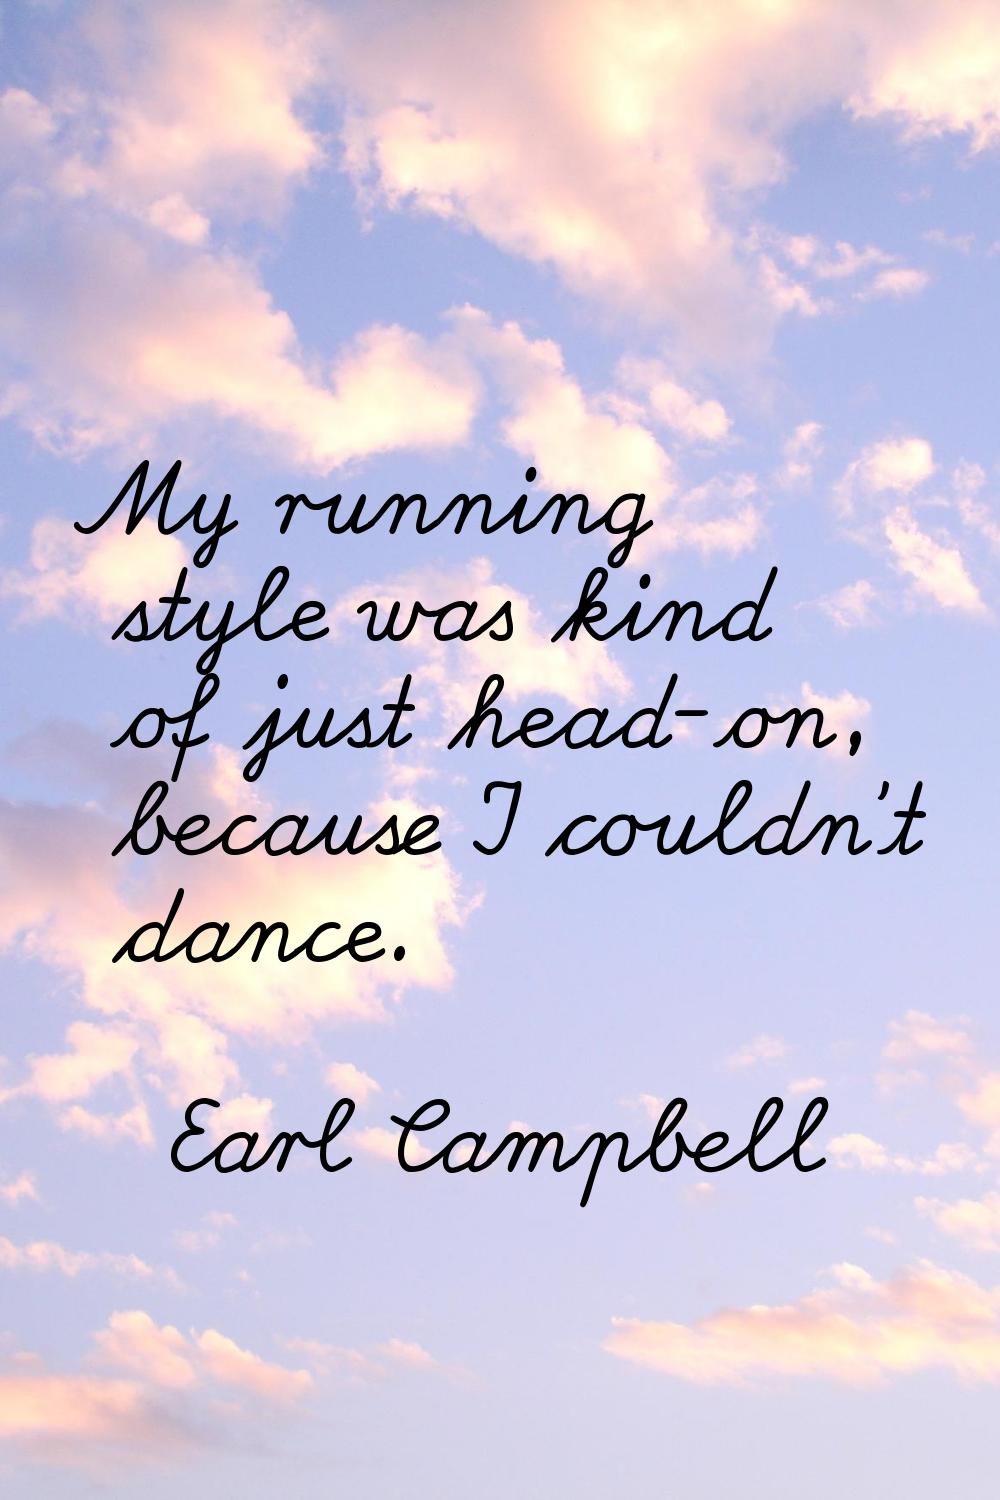 My running style was kind of just head-on, because I couldn't dance.